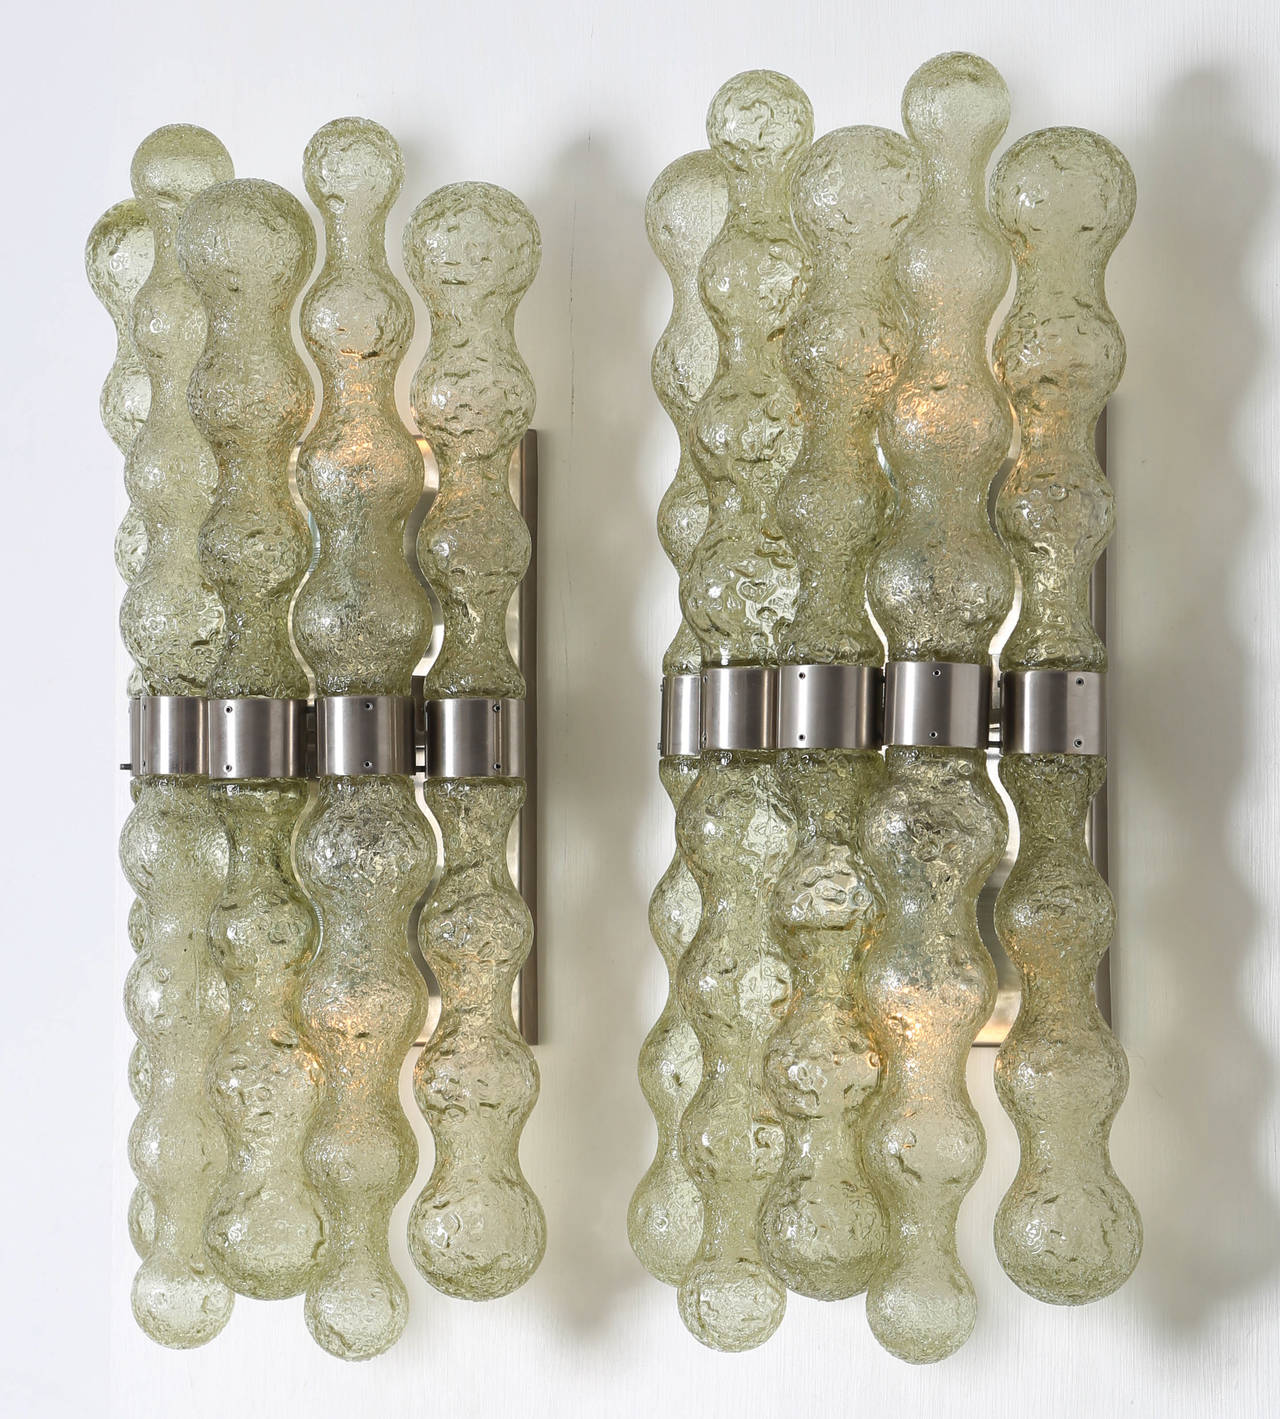 A pair of rare 1970s Murano glass sconces. Each sconce has ten transparent-green curvilinear pieces of textured glass held by stainless steel fittings. Each sconce holds two candelabra-base bulbs. These sconces are at the 1stdibs Gallery at the New